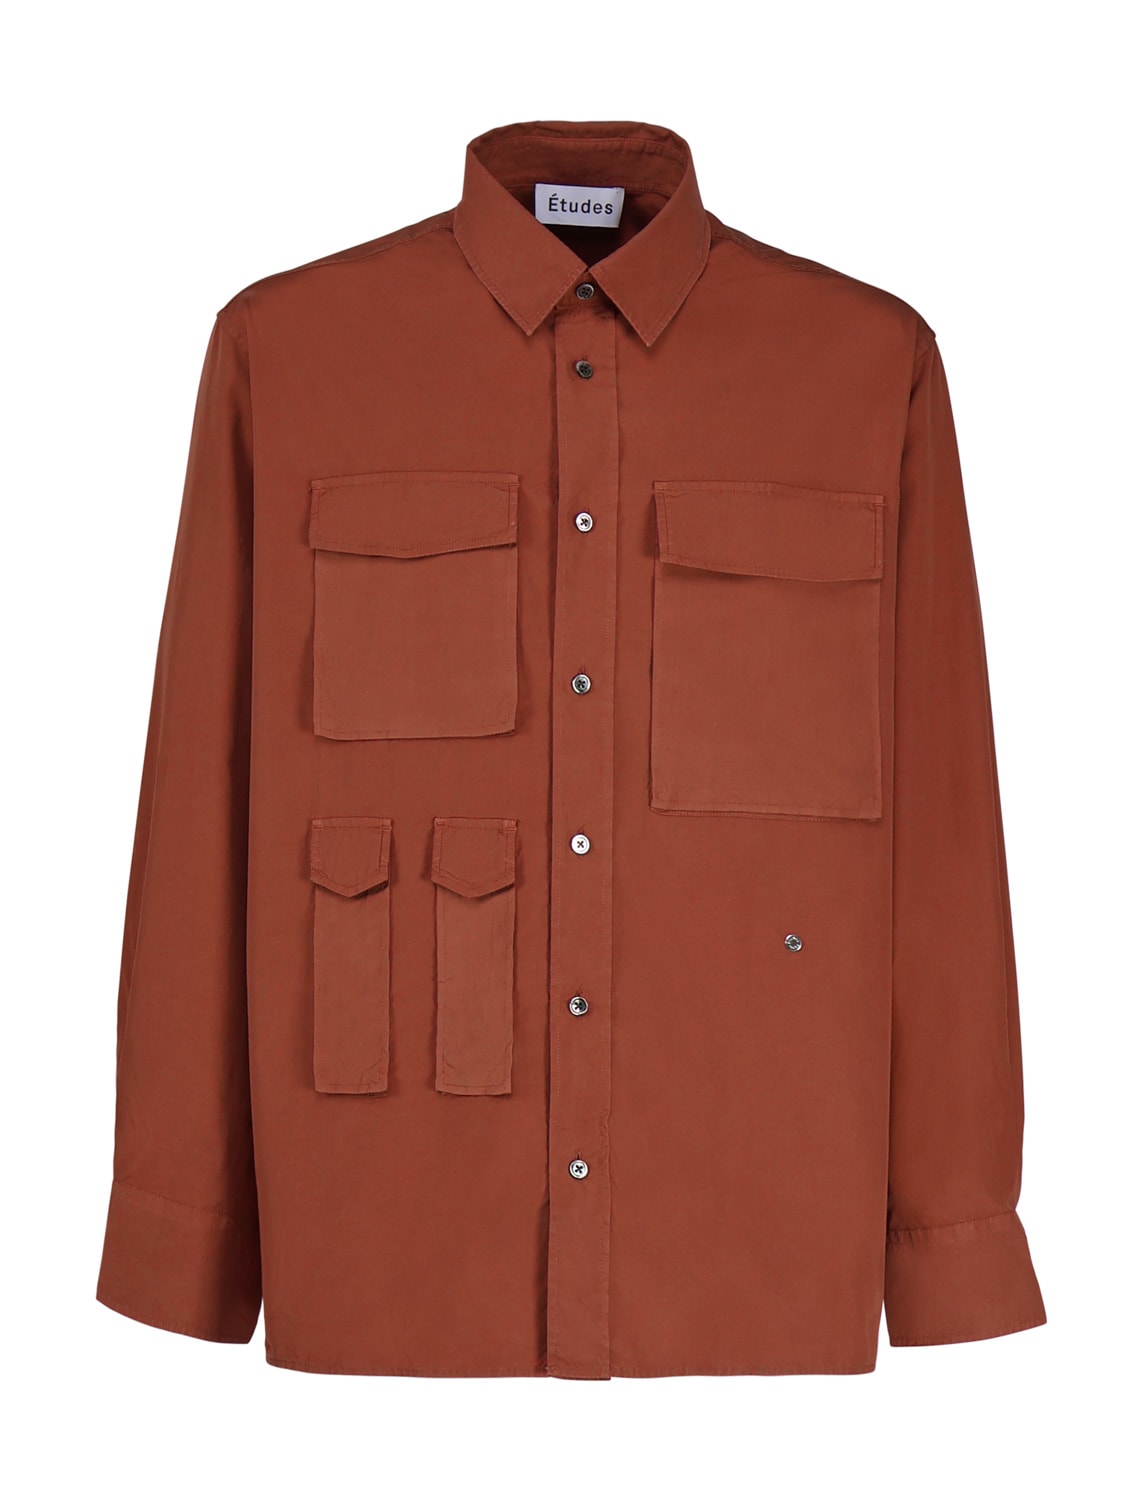 ETUDES STUDIO CHECKPOINT DYED BROWN SHIRT